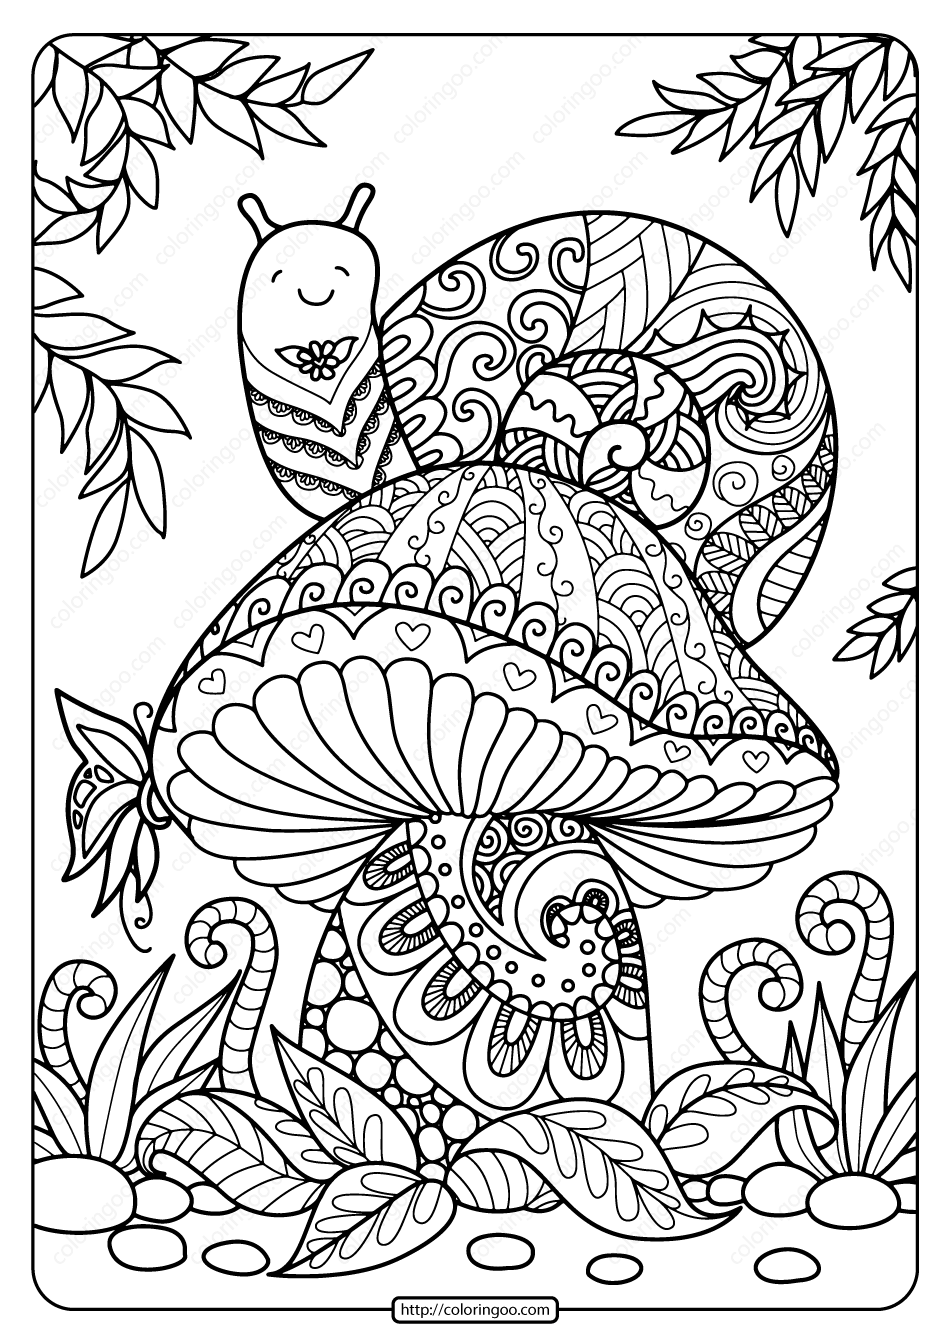 printable snail on a mushroom coloring page